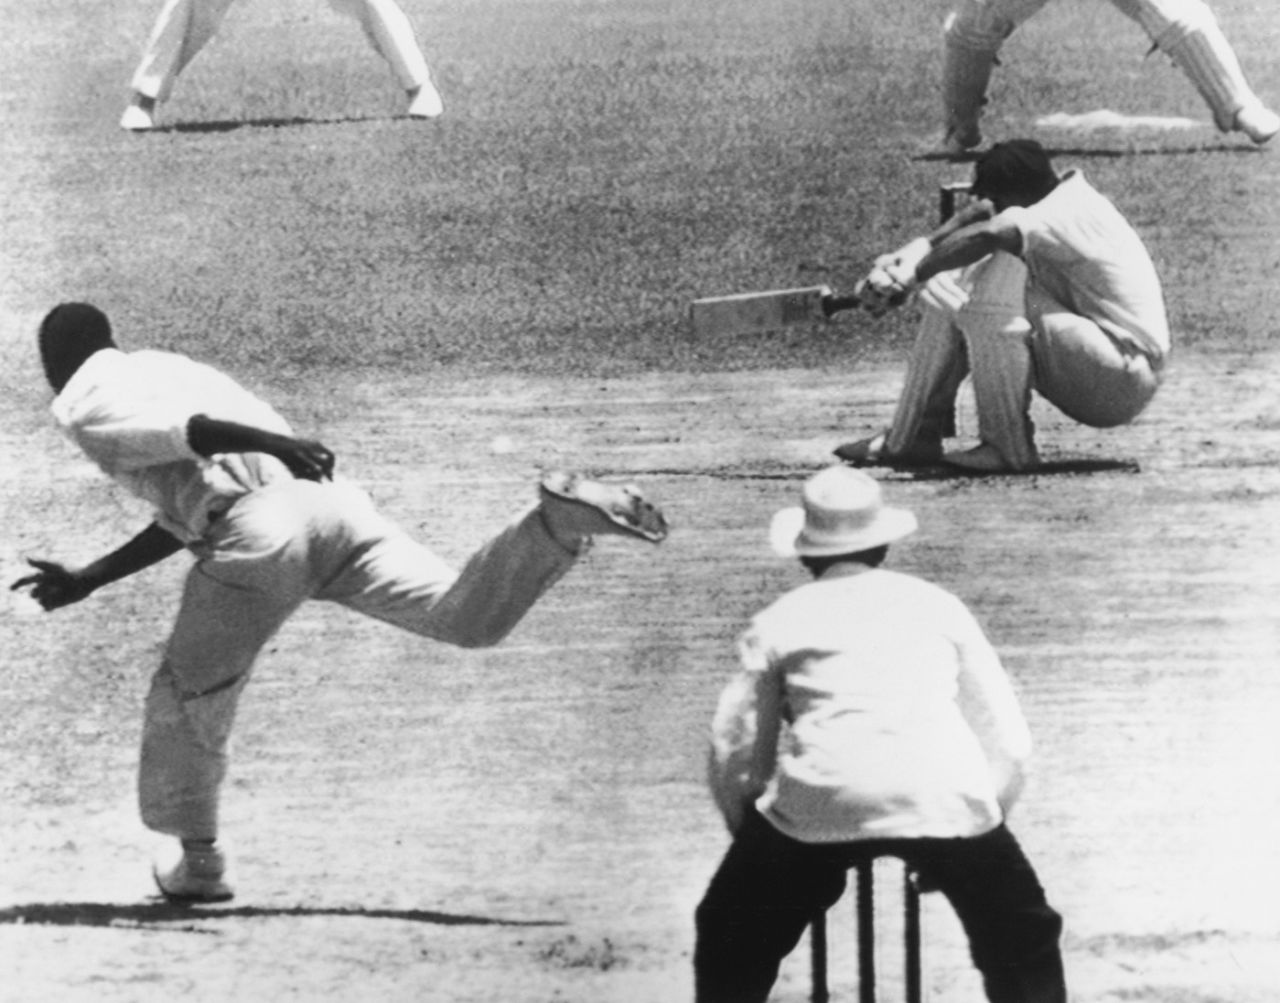 Norman O'Neill ducks to evade a Wes Hall bouncer, Australia v West Indies, 1st Test, Brisbane, 4th day, December 13, 1960